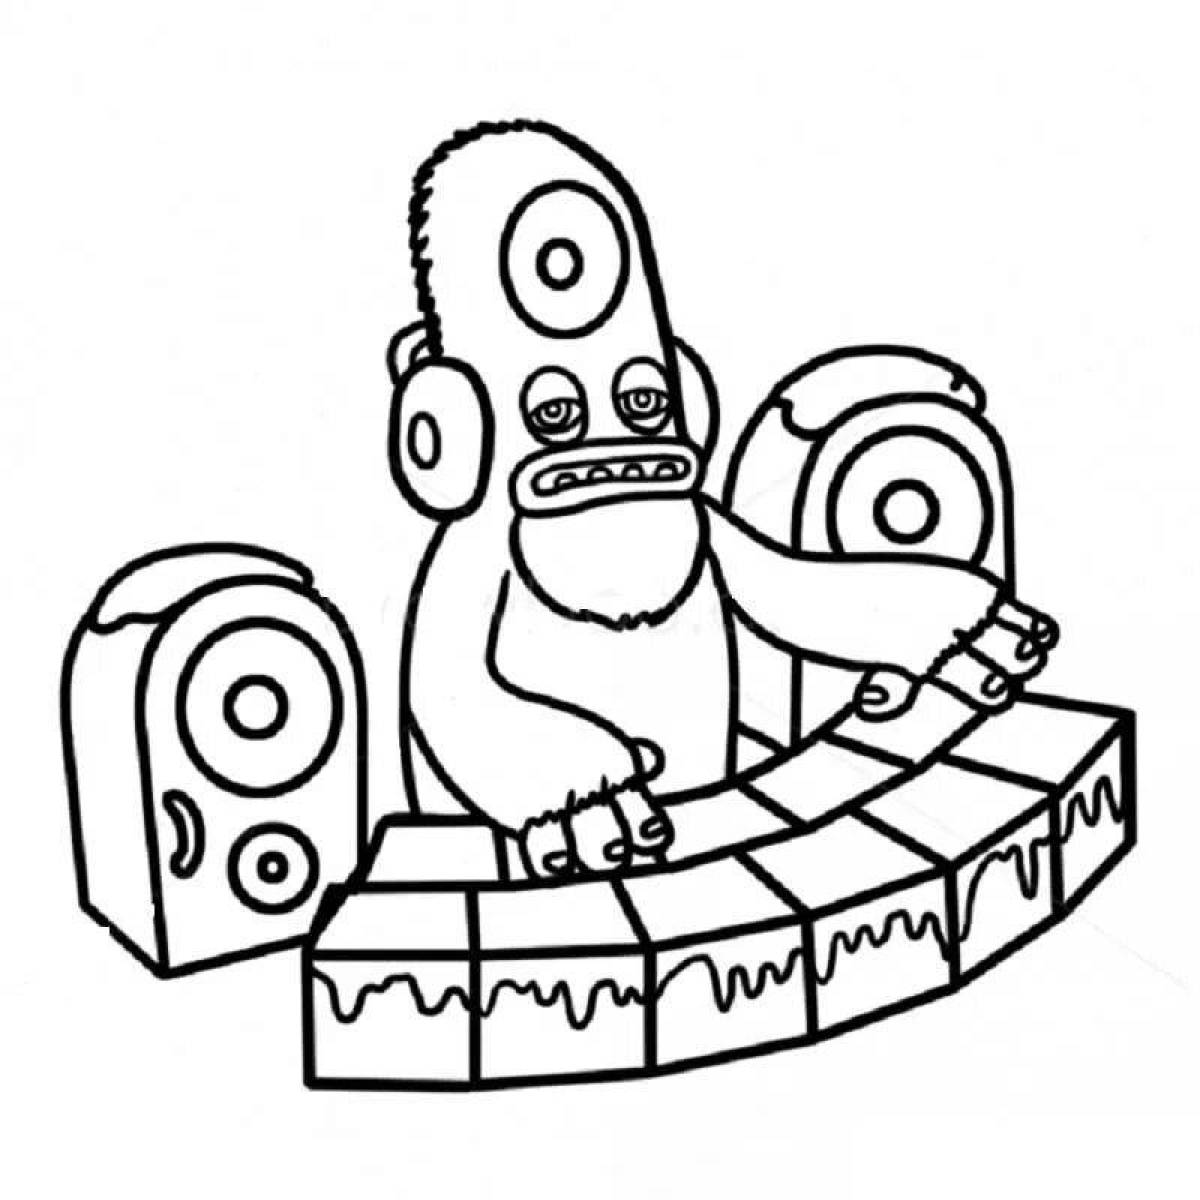 Coloring pages of singing monsters for kids